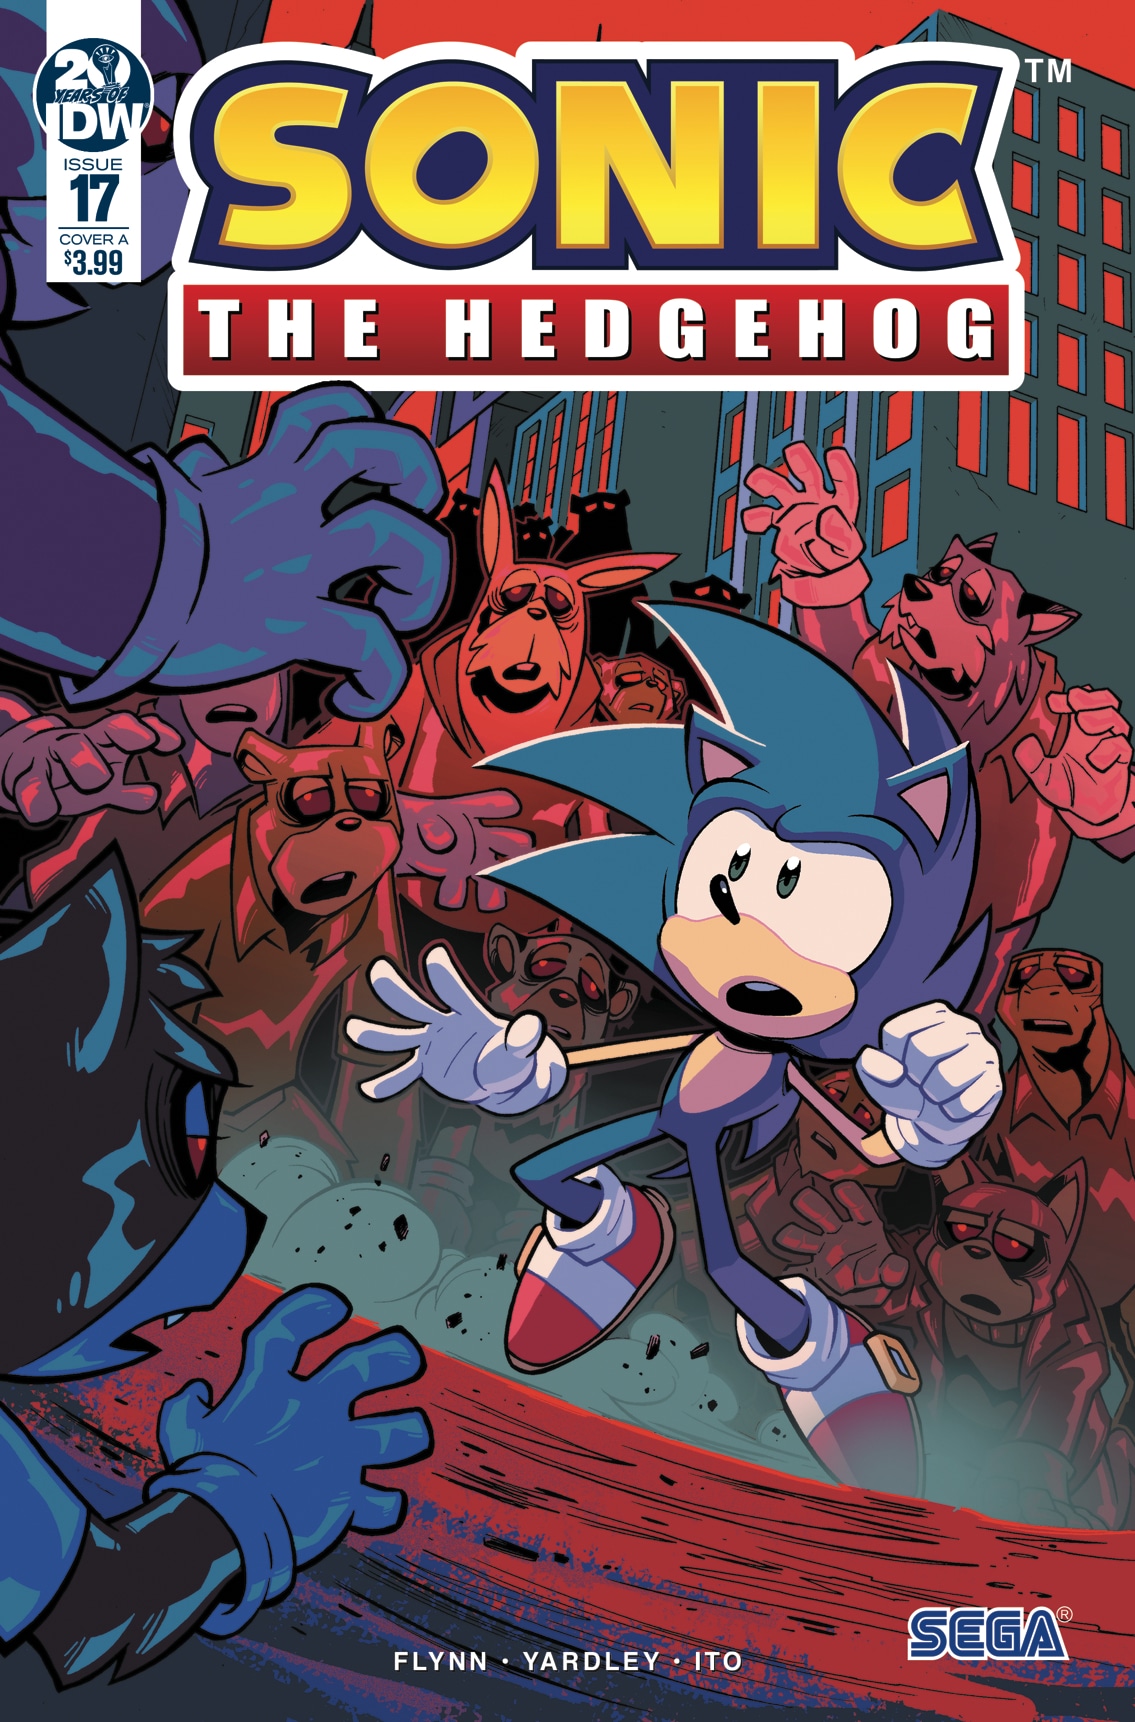 IDW Sonic Issue 10 covers - Tails' Channel